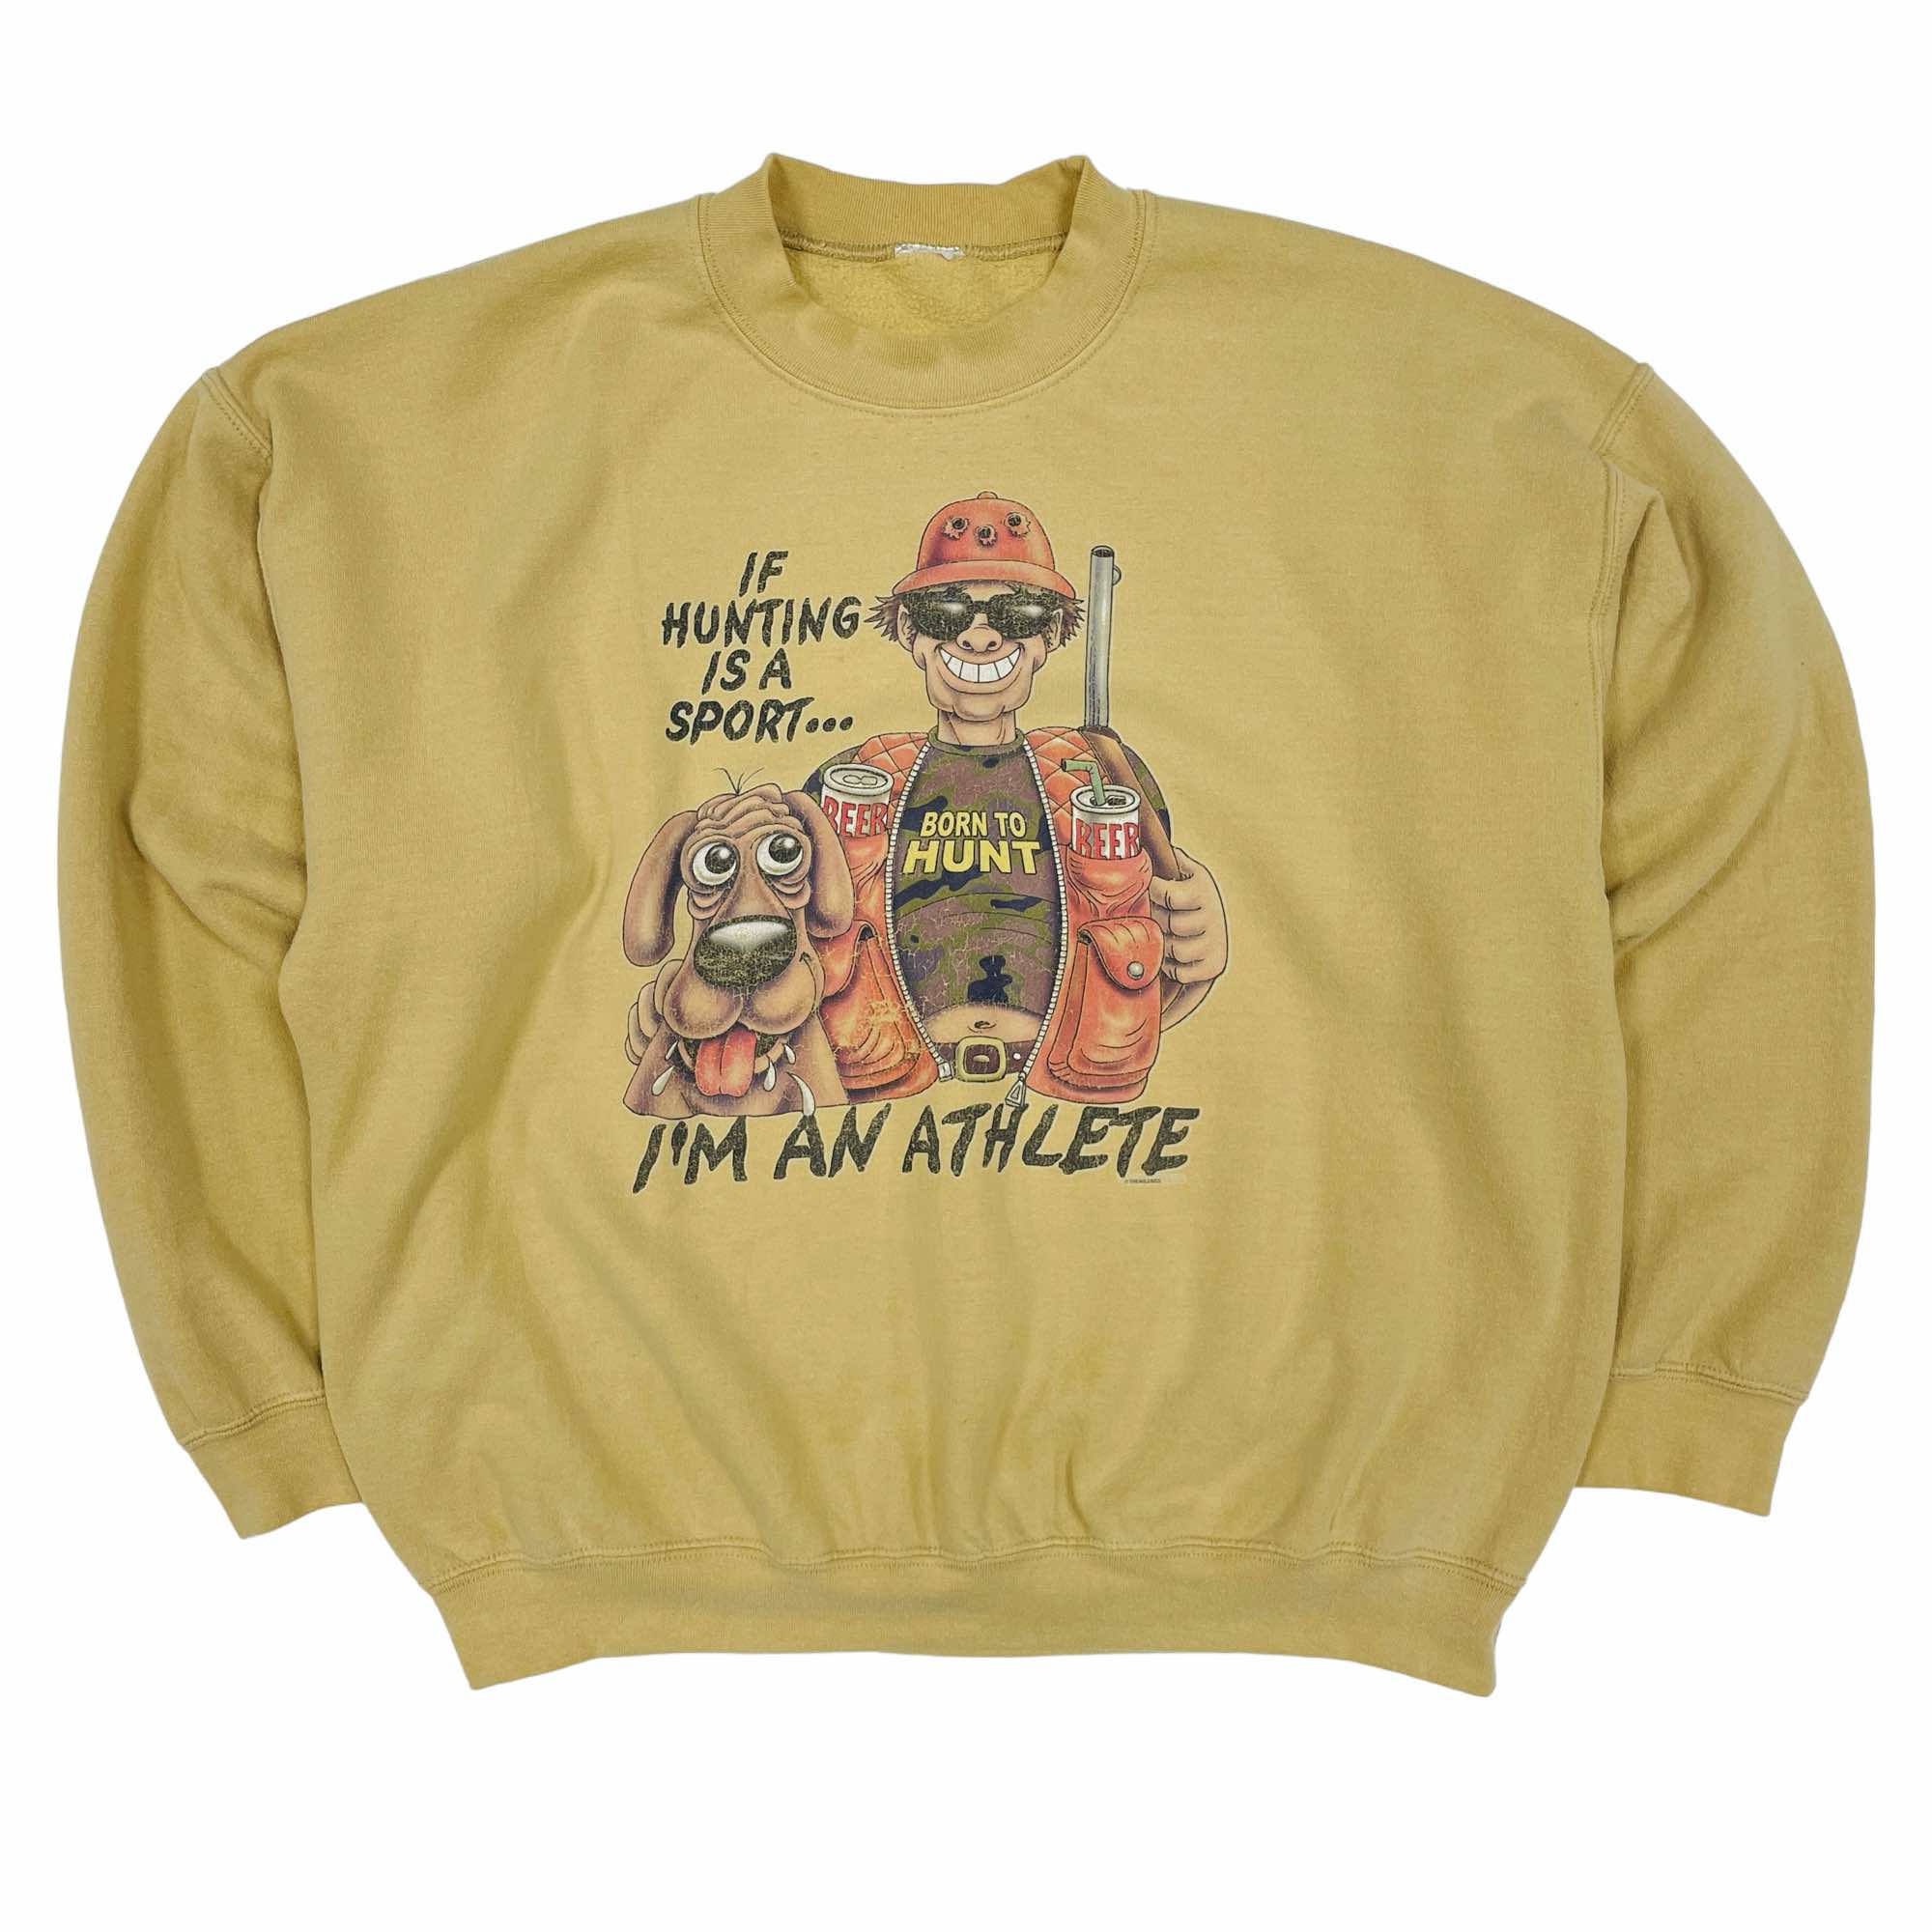 If Hunting is a Sport I'm An Athlete Graphic Sweatshirt - 2XL